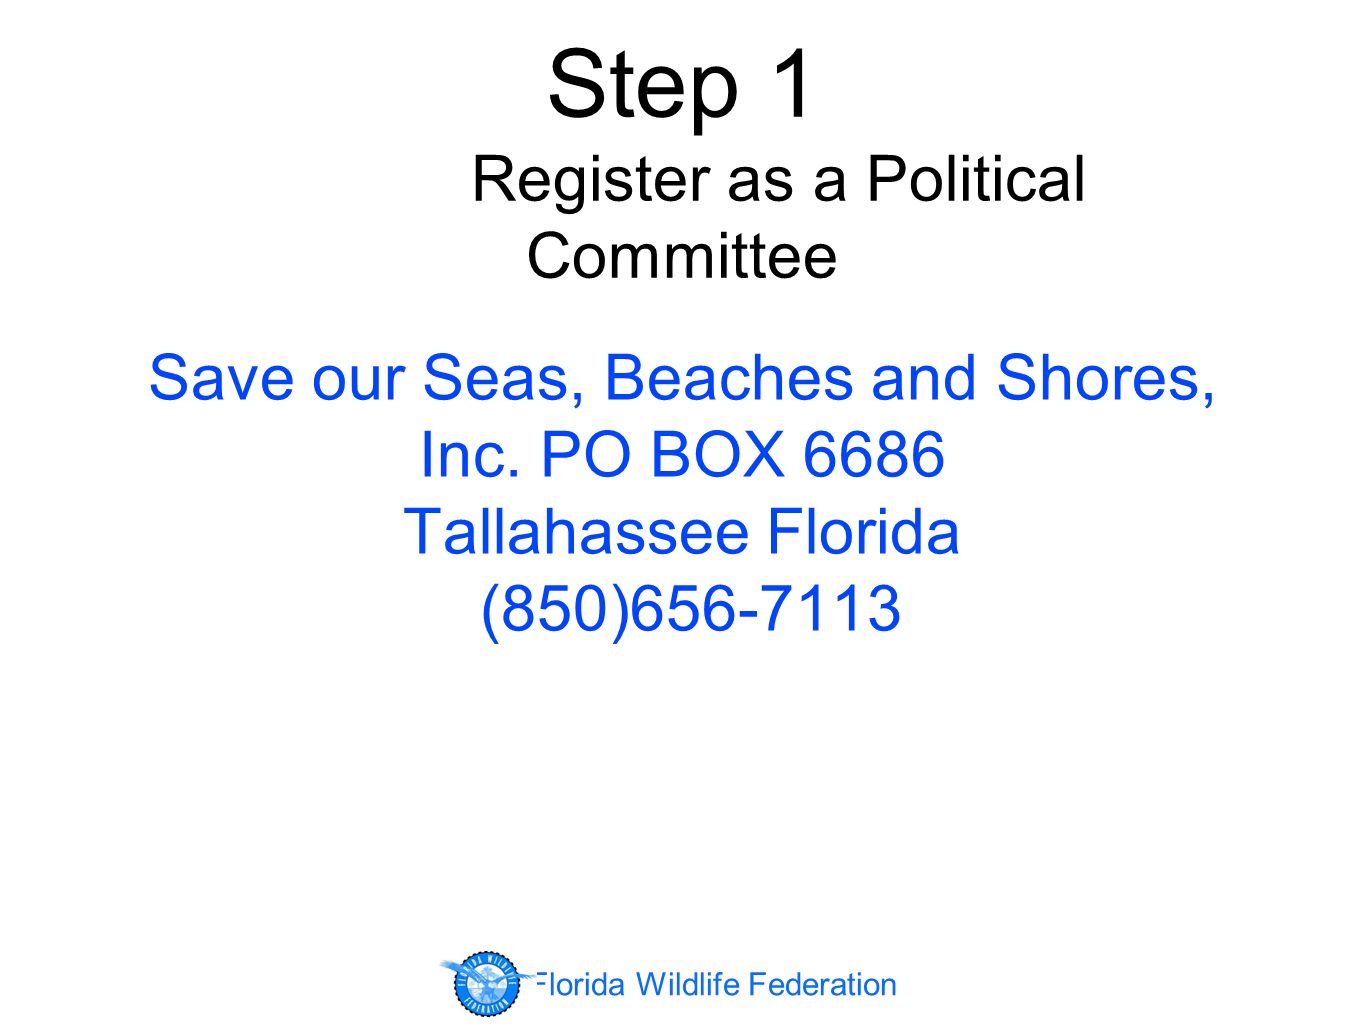 Step 1 Register as a Political Committee Save our Seas, Beaches and Shores, Inc.